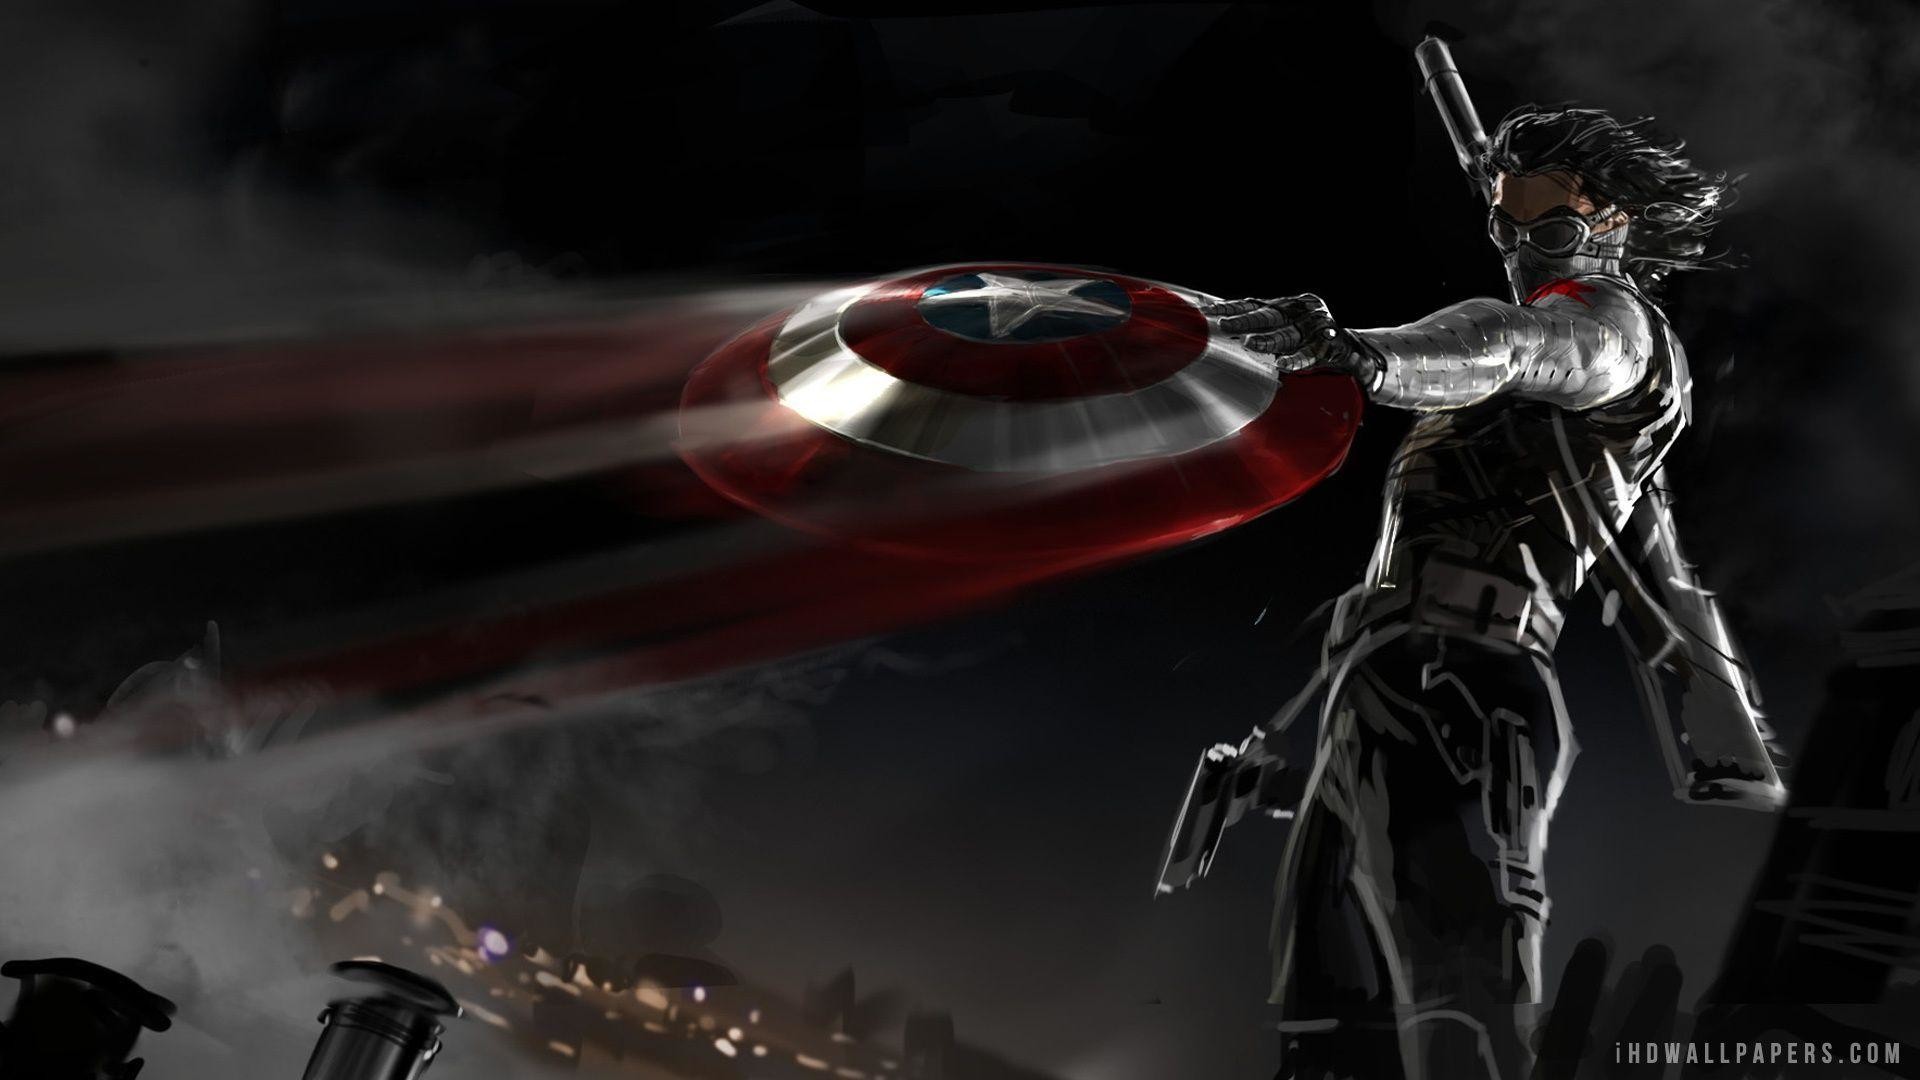 1920x1080 79 Captain America: The Winter Soldier HD Wallpapers | Backgrounds .